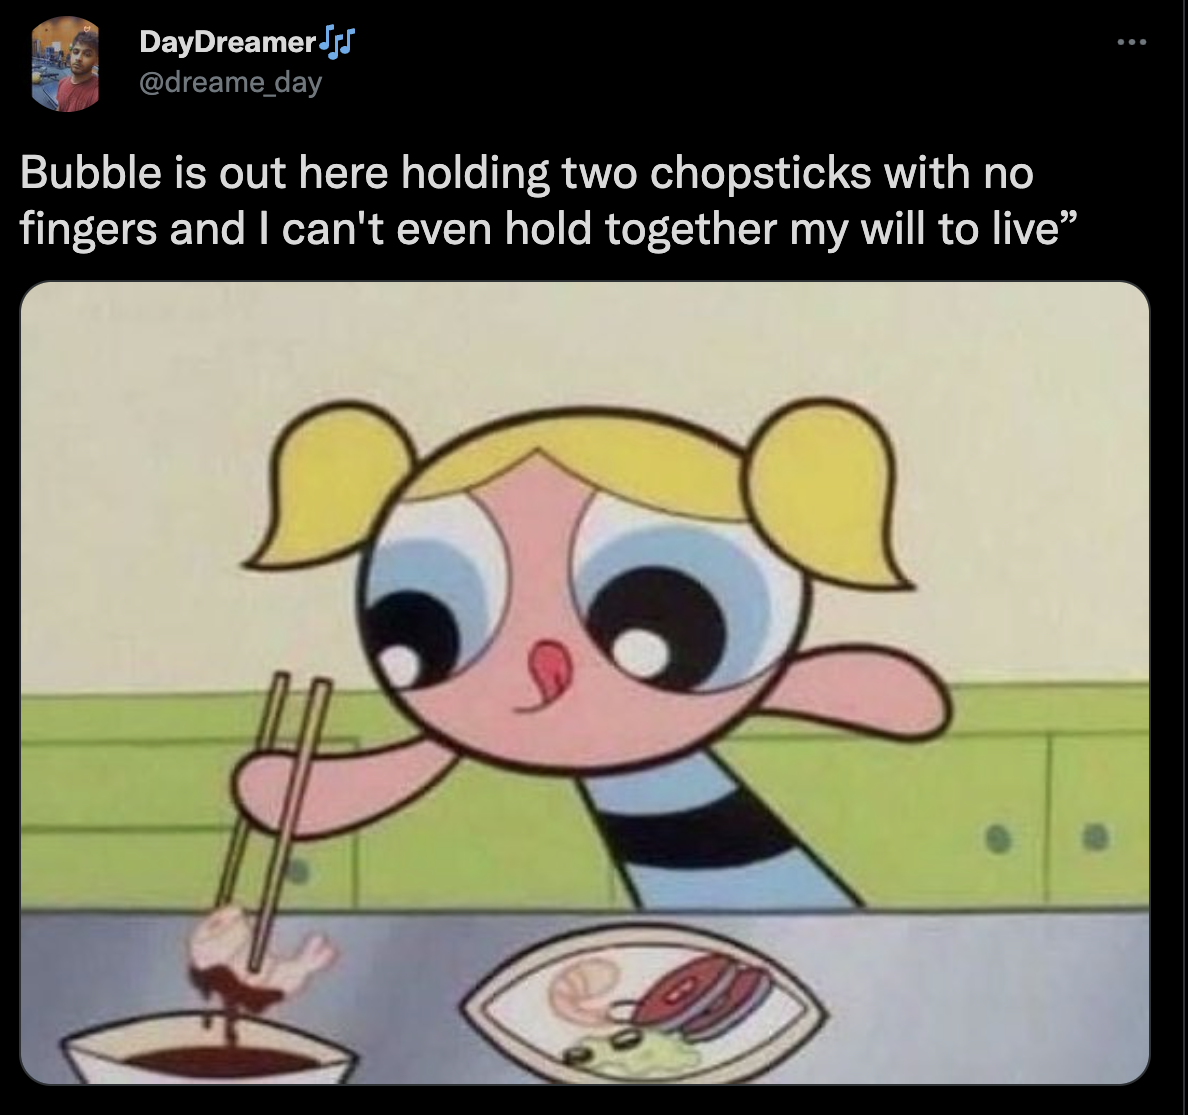 random tweets - DayDreamer's Bubble is out here holding two chopsticks with no fingers and I can't even hold together my will to live"